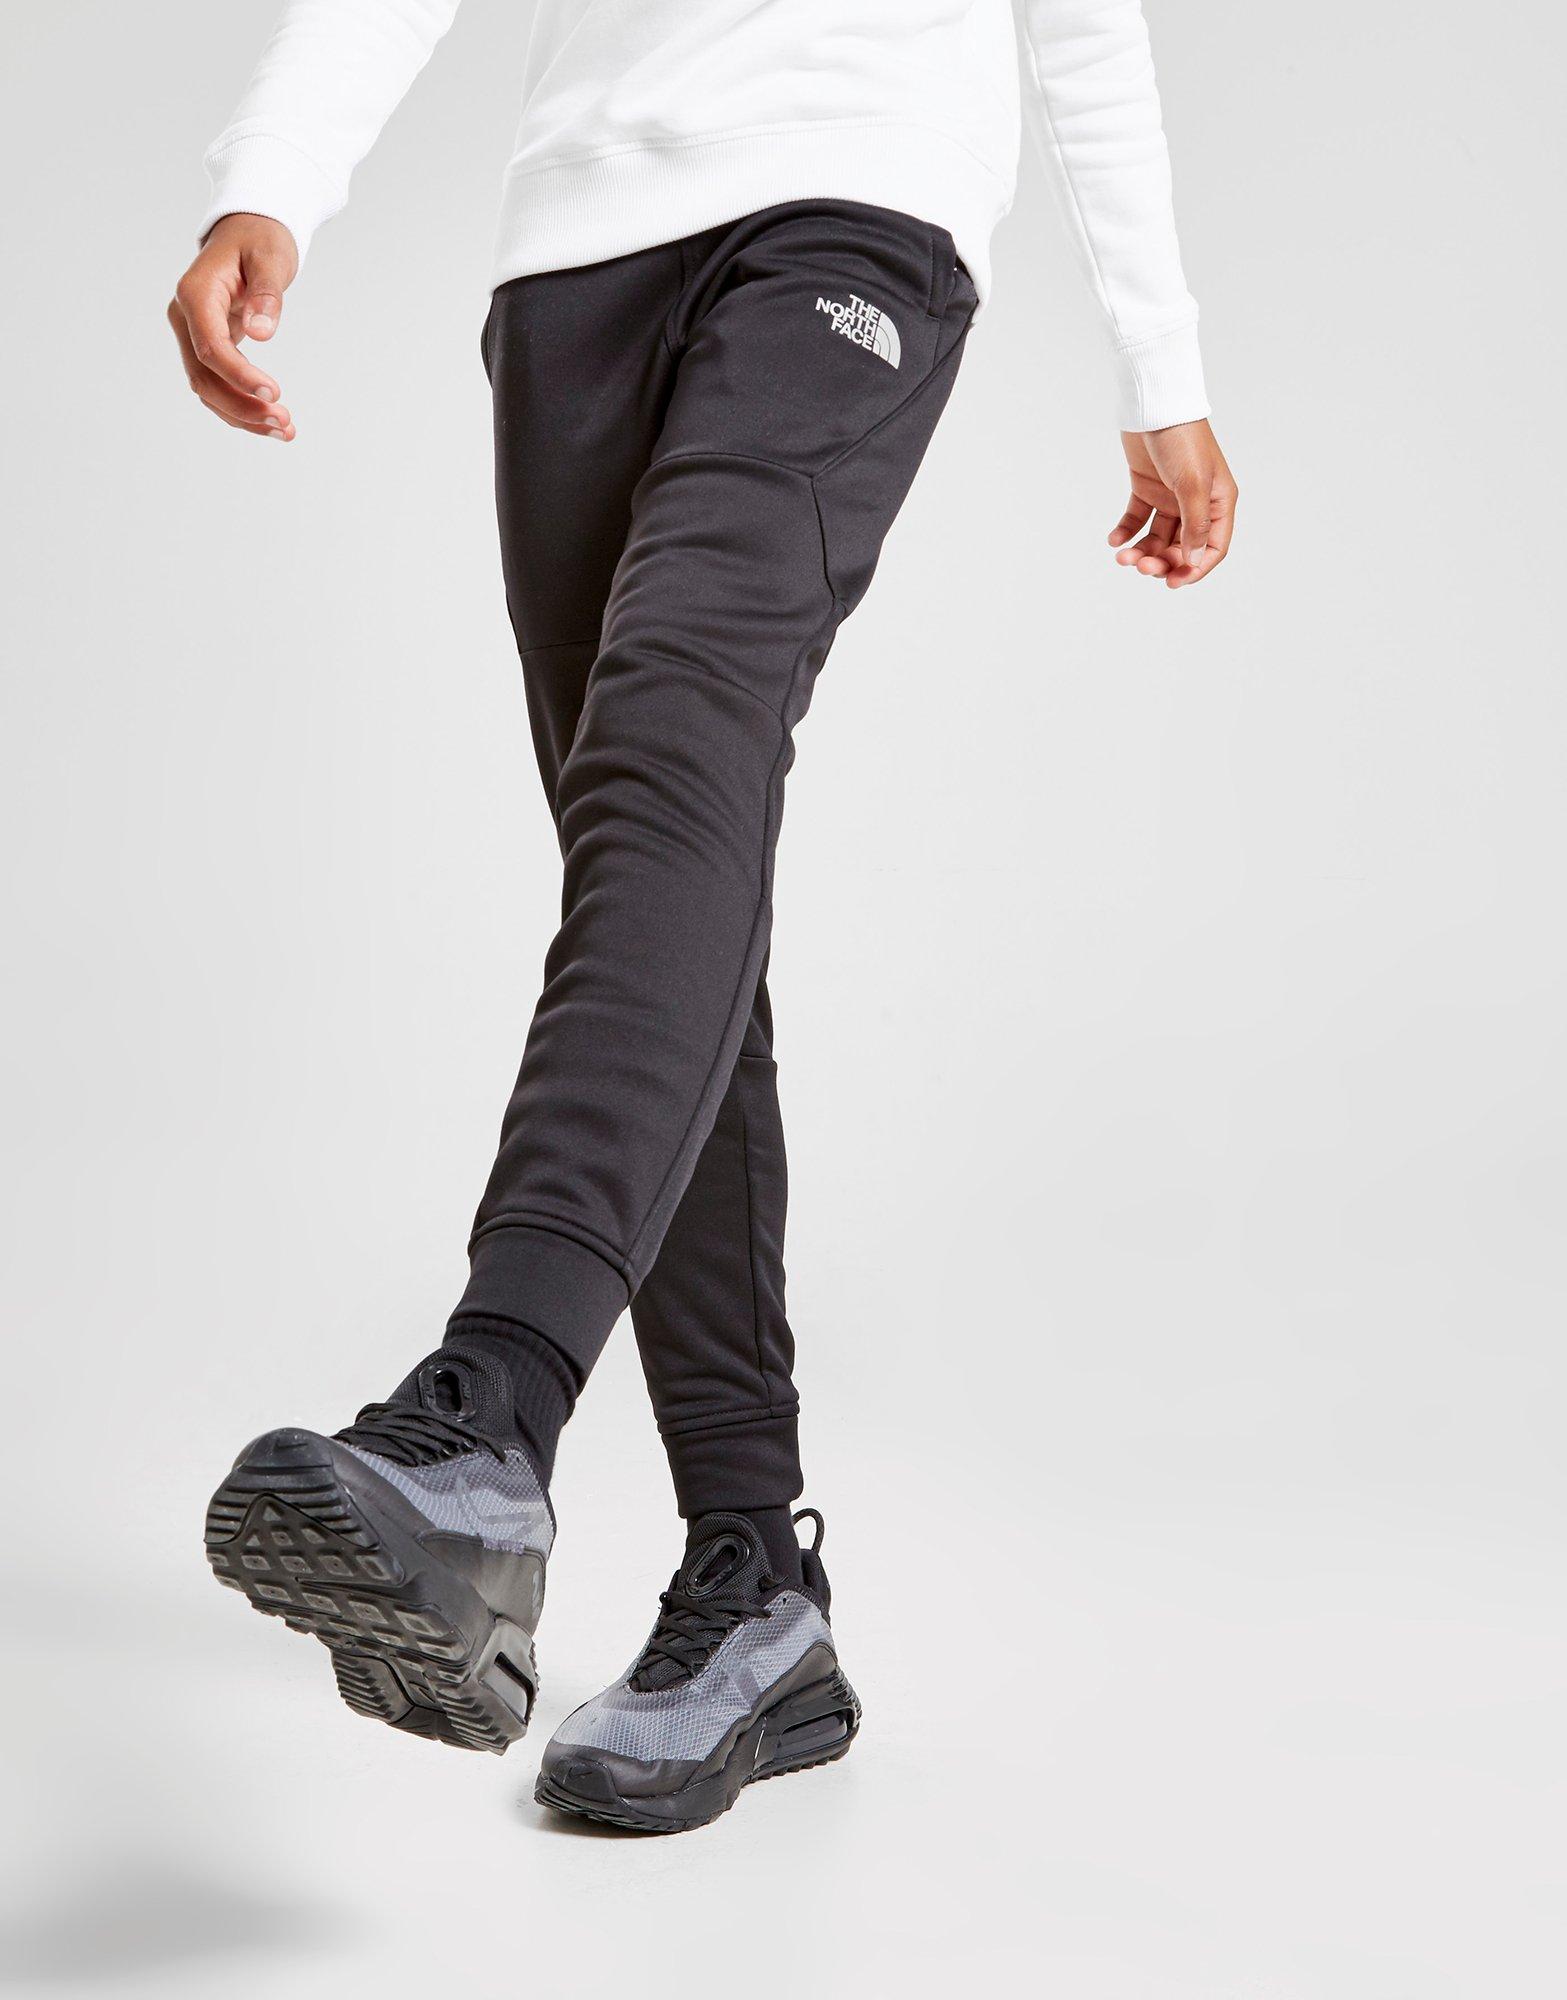 north face jogging bottoms